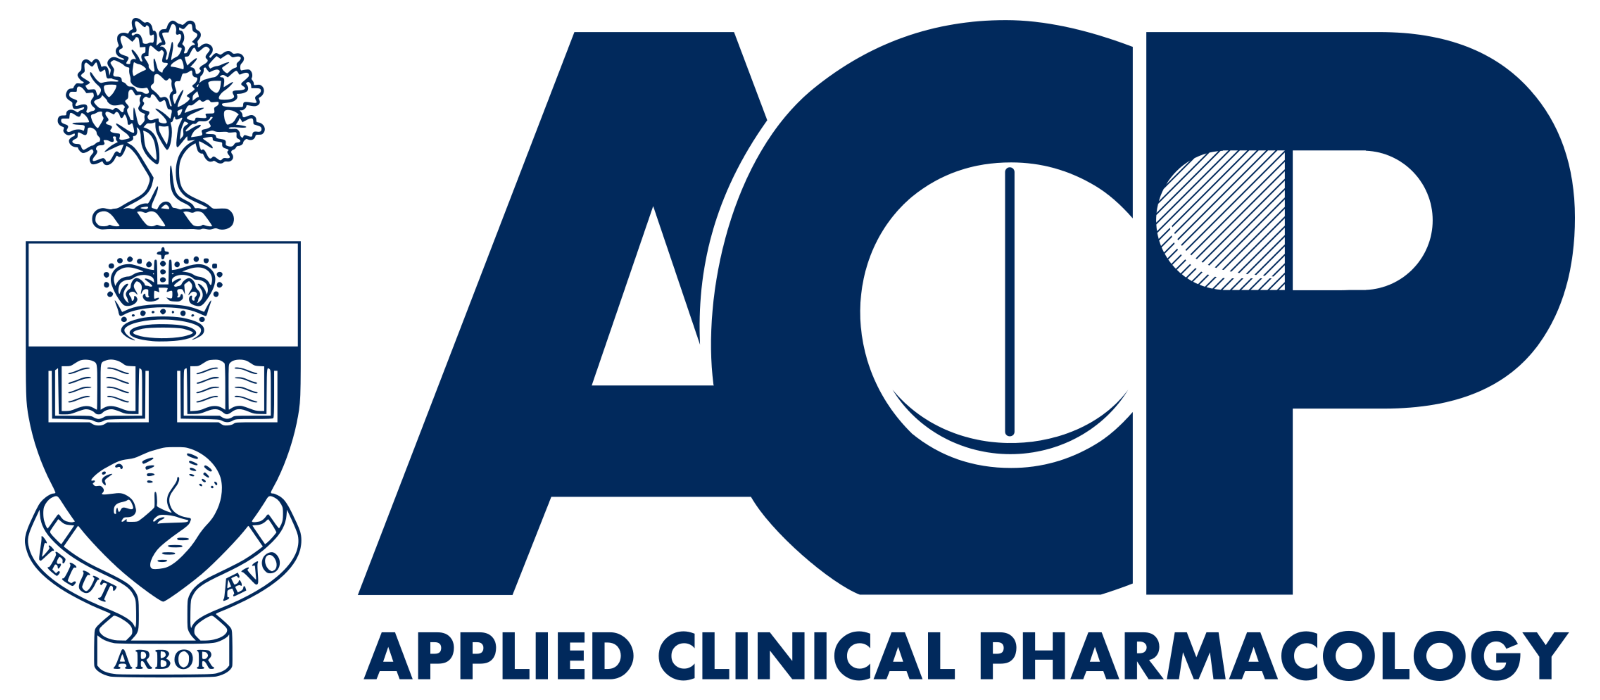 Applied Clinical Pharmacology logo